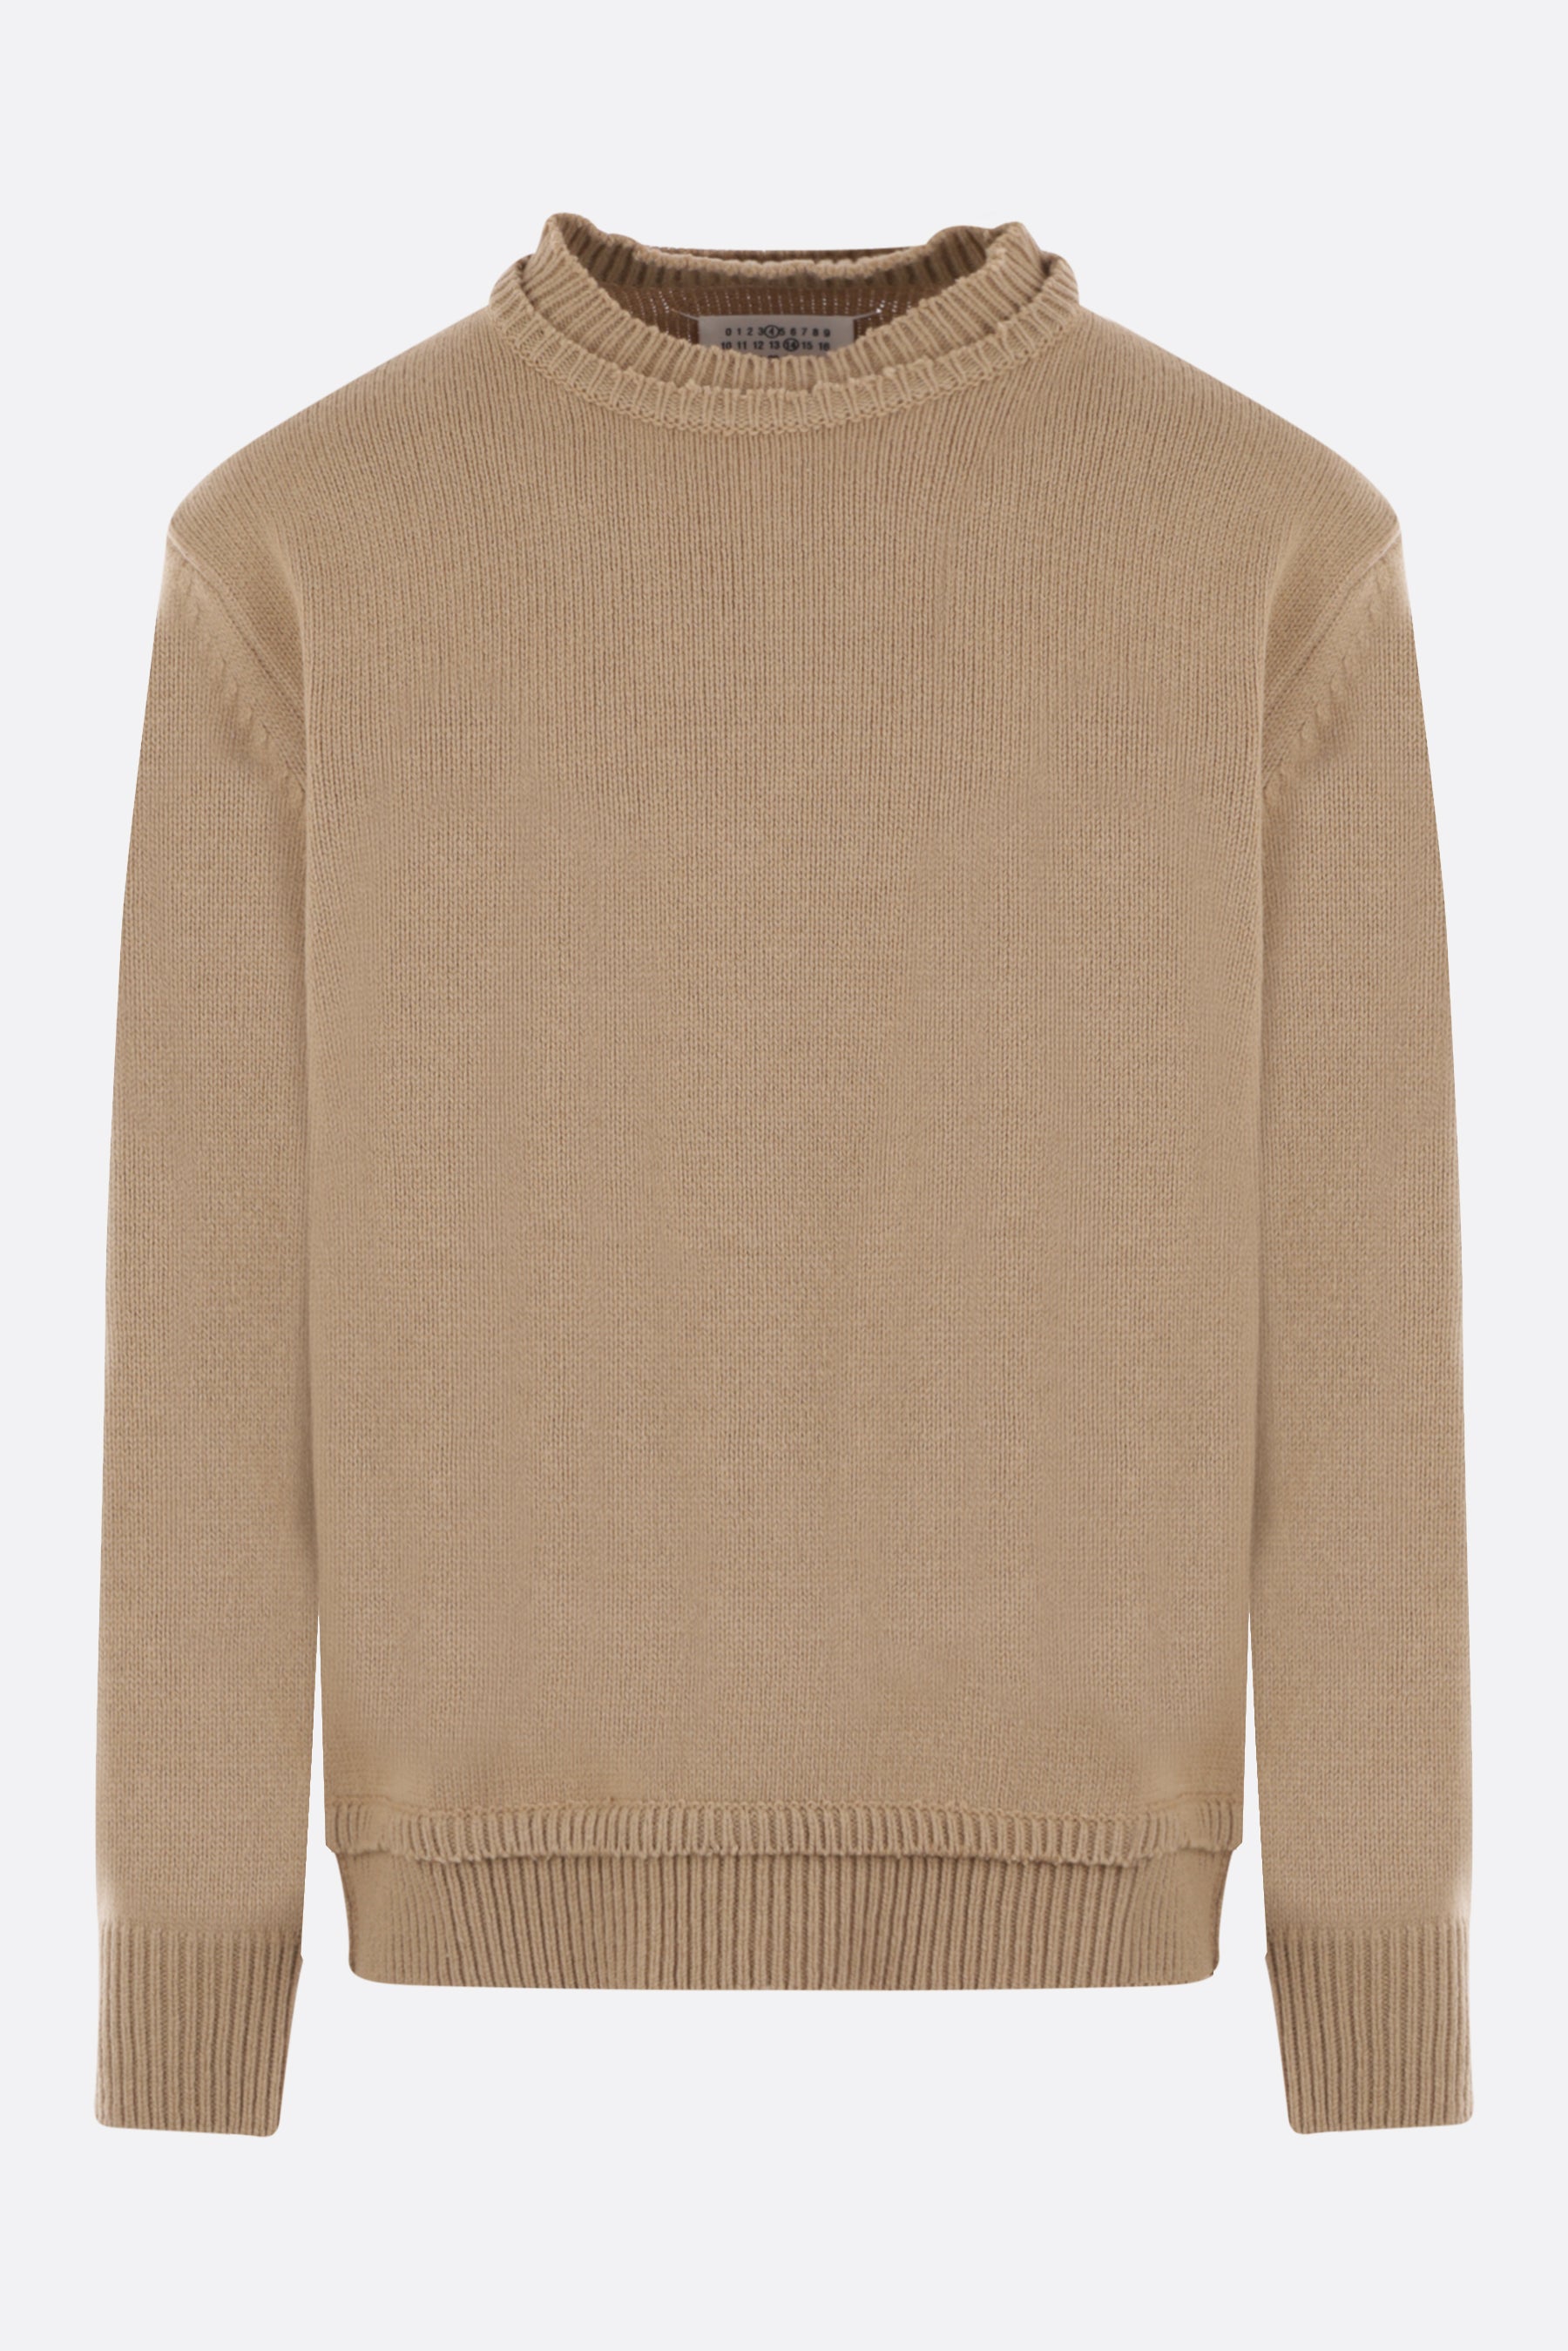 wool, cotton and linen pullover